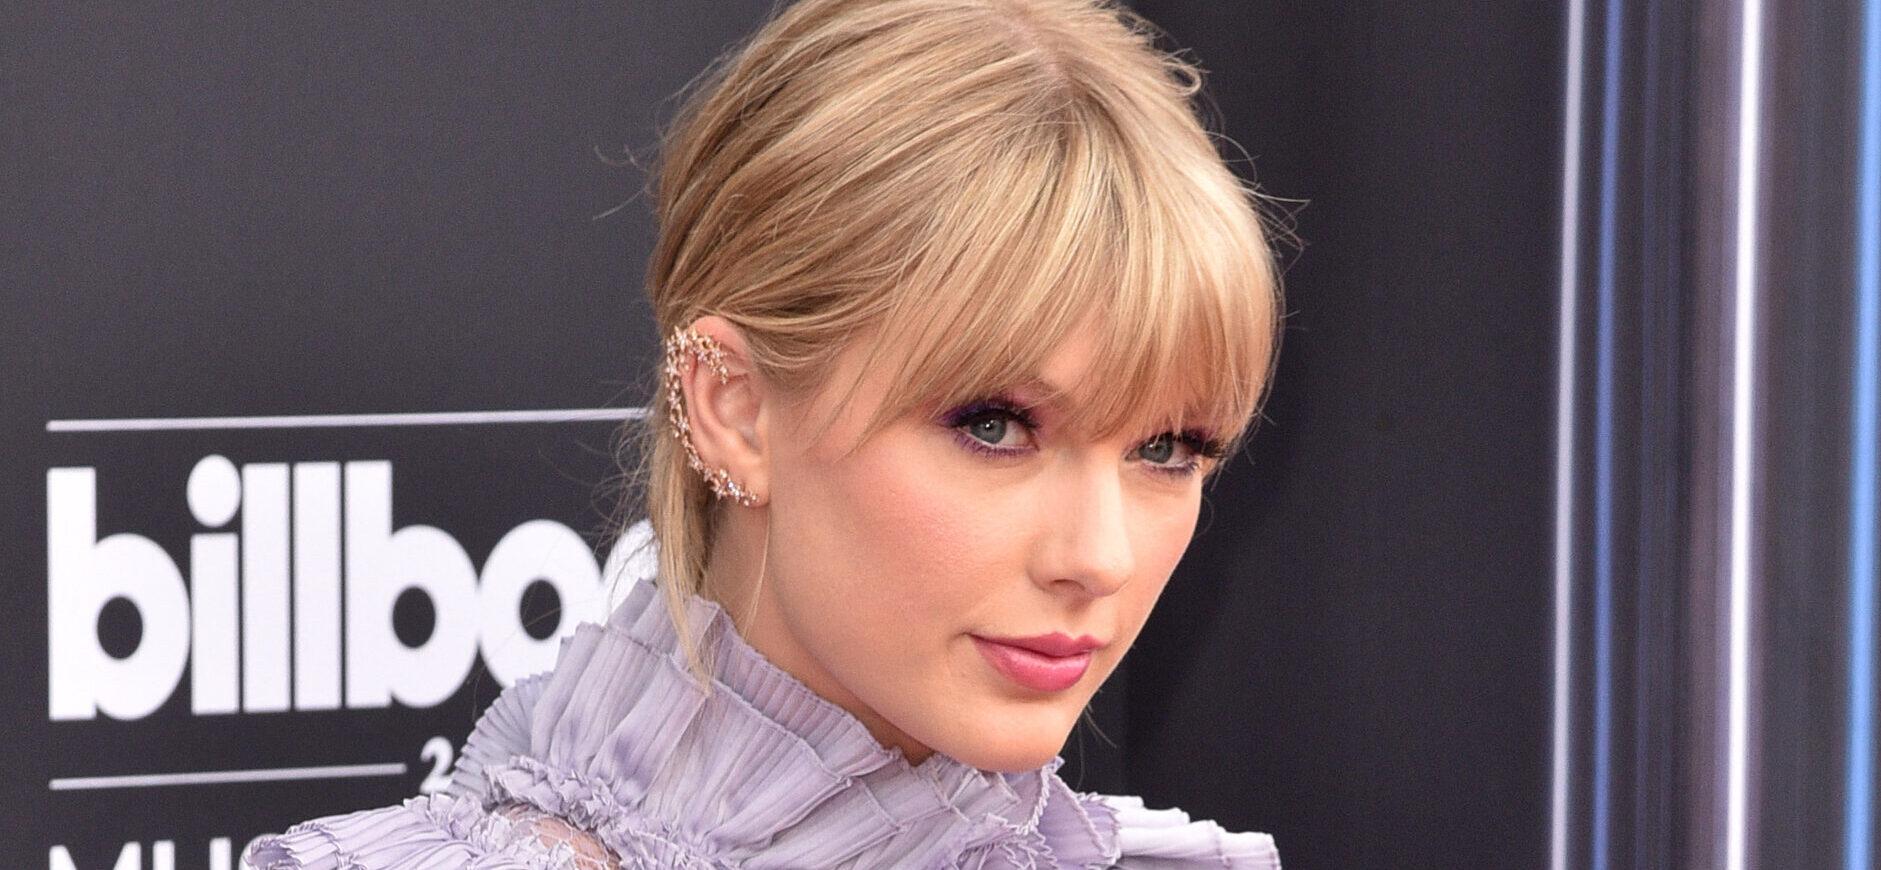 Taylor Swift’s Massive Earnings From Spotify Revealed